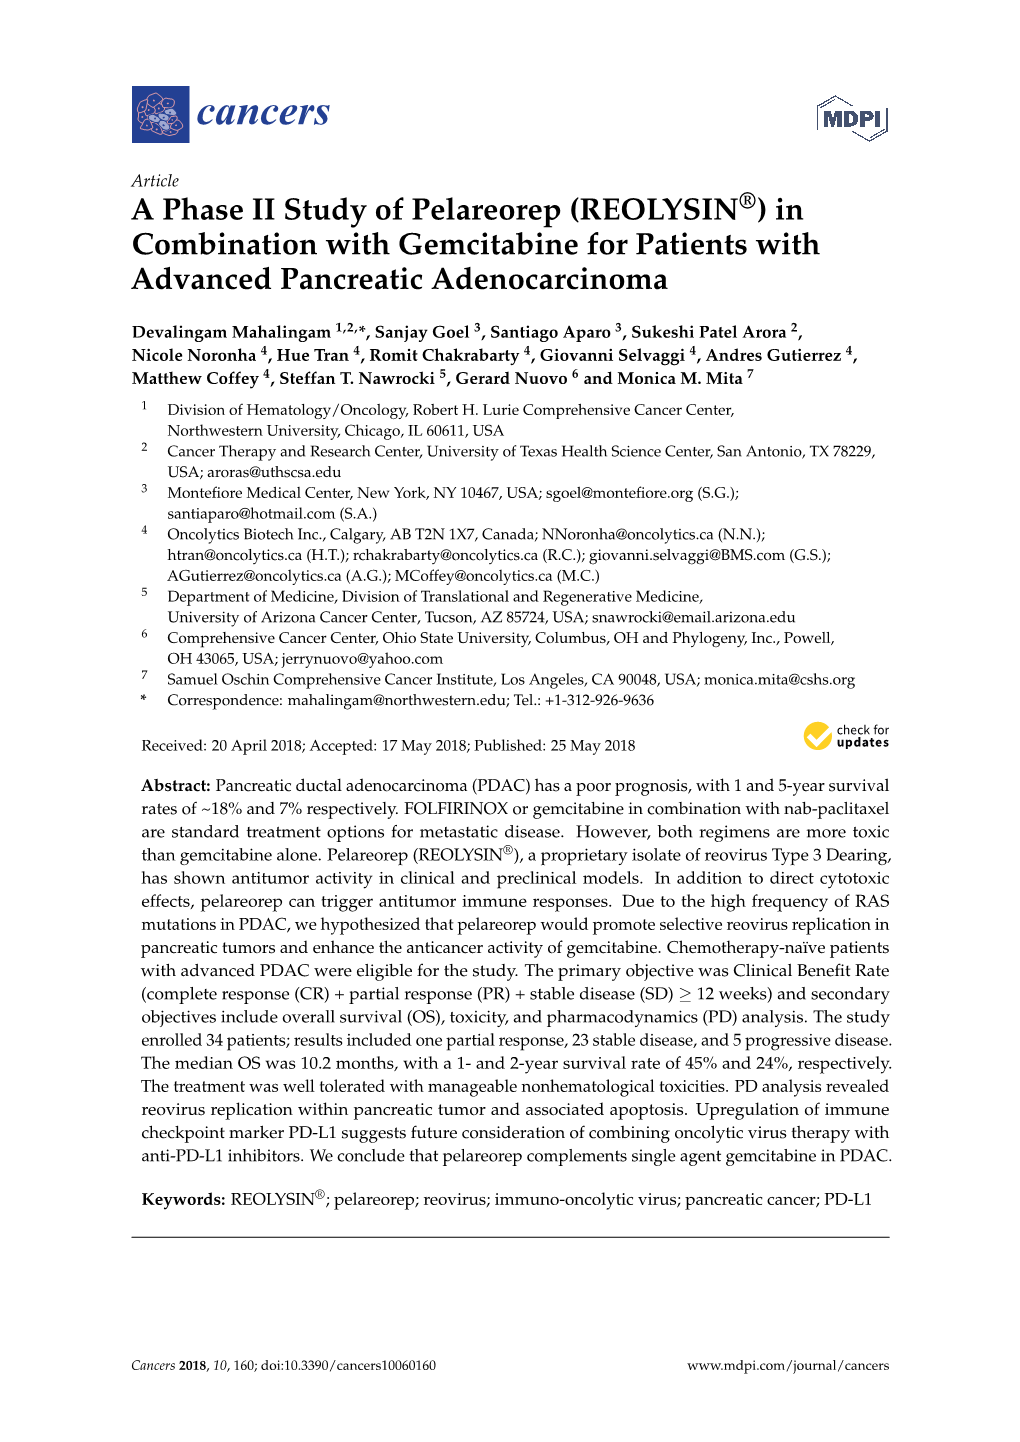 A Phase II Study of Pelareorep (REOLYSIN®) in Combination with Gemcitabine for Patients with Advanced Pancreatic Adenocarcinoma